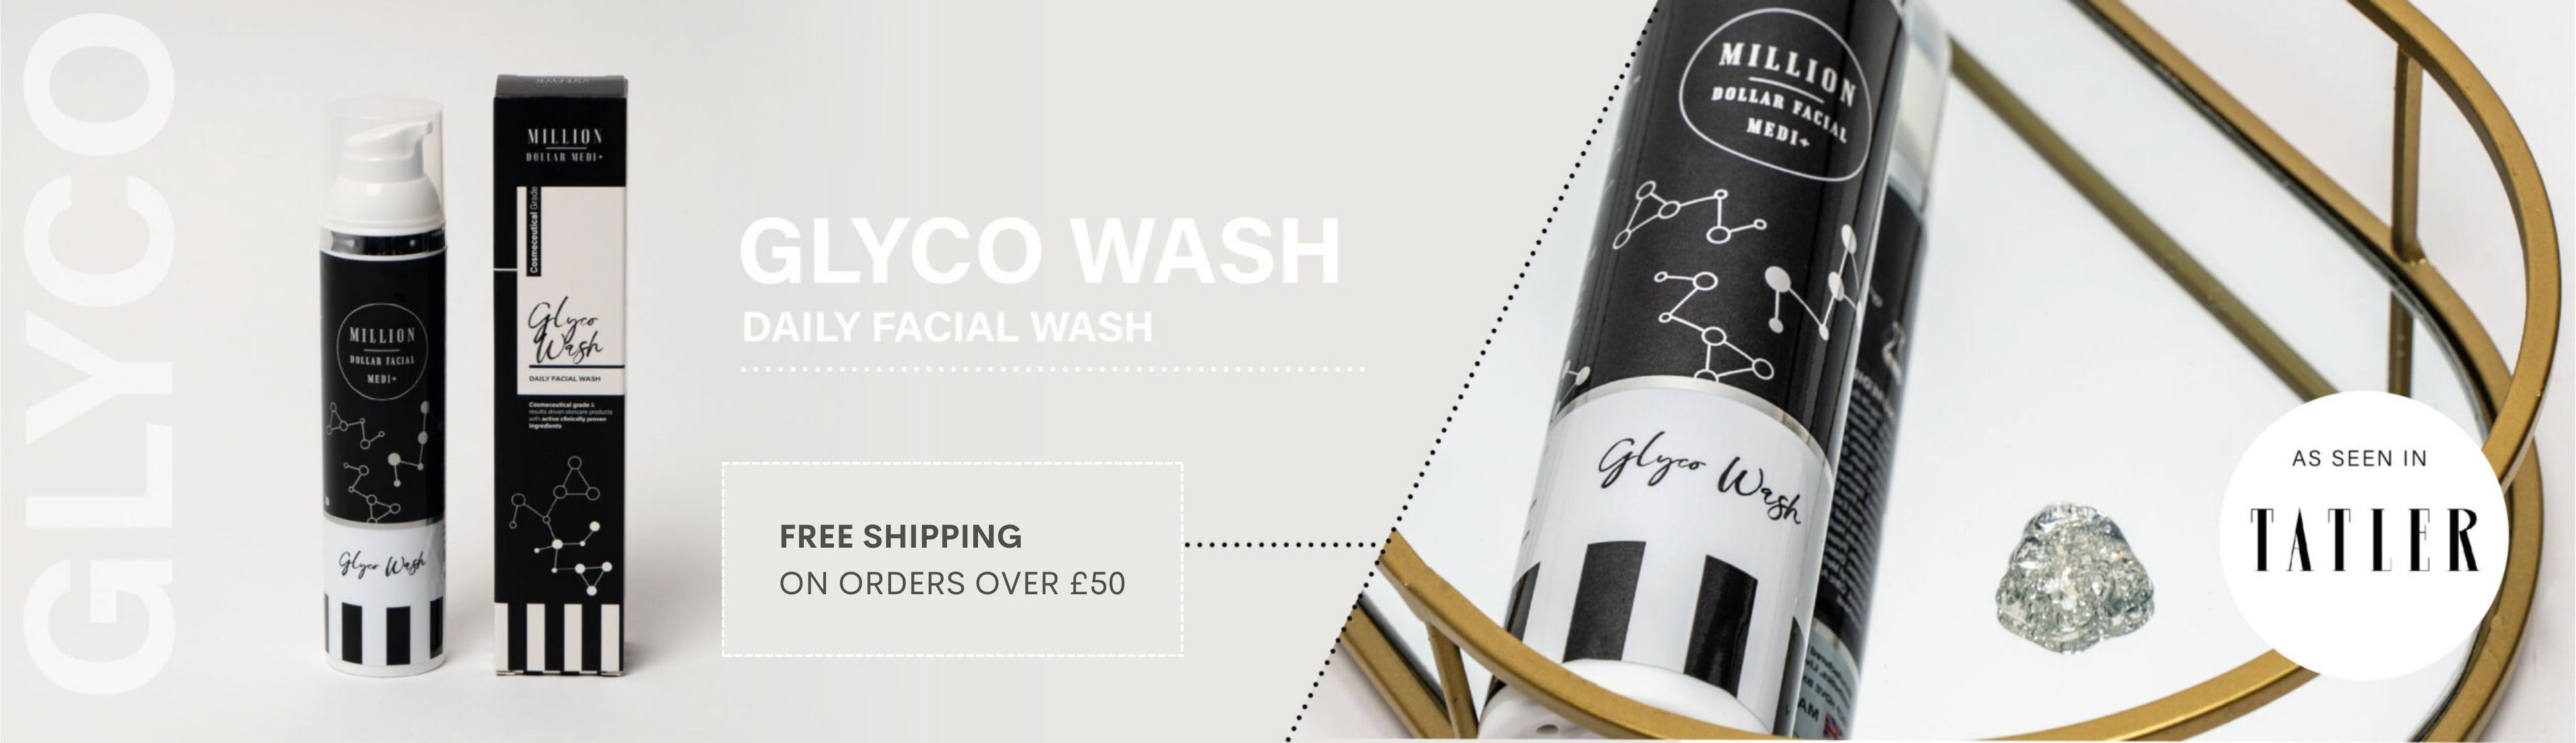 Glyco Wash as seen in Tatler. Daily Facial Wash.  Free Shipping on orders over £50.